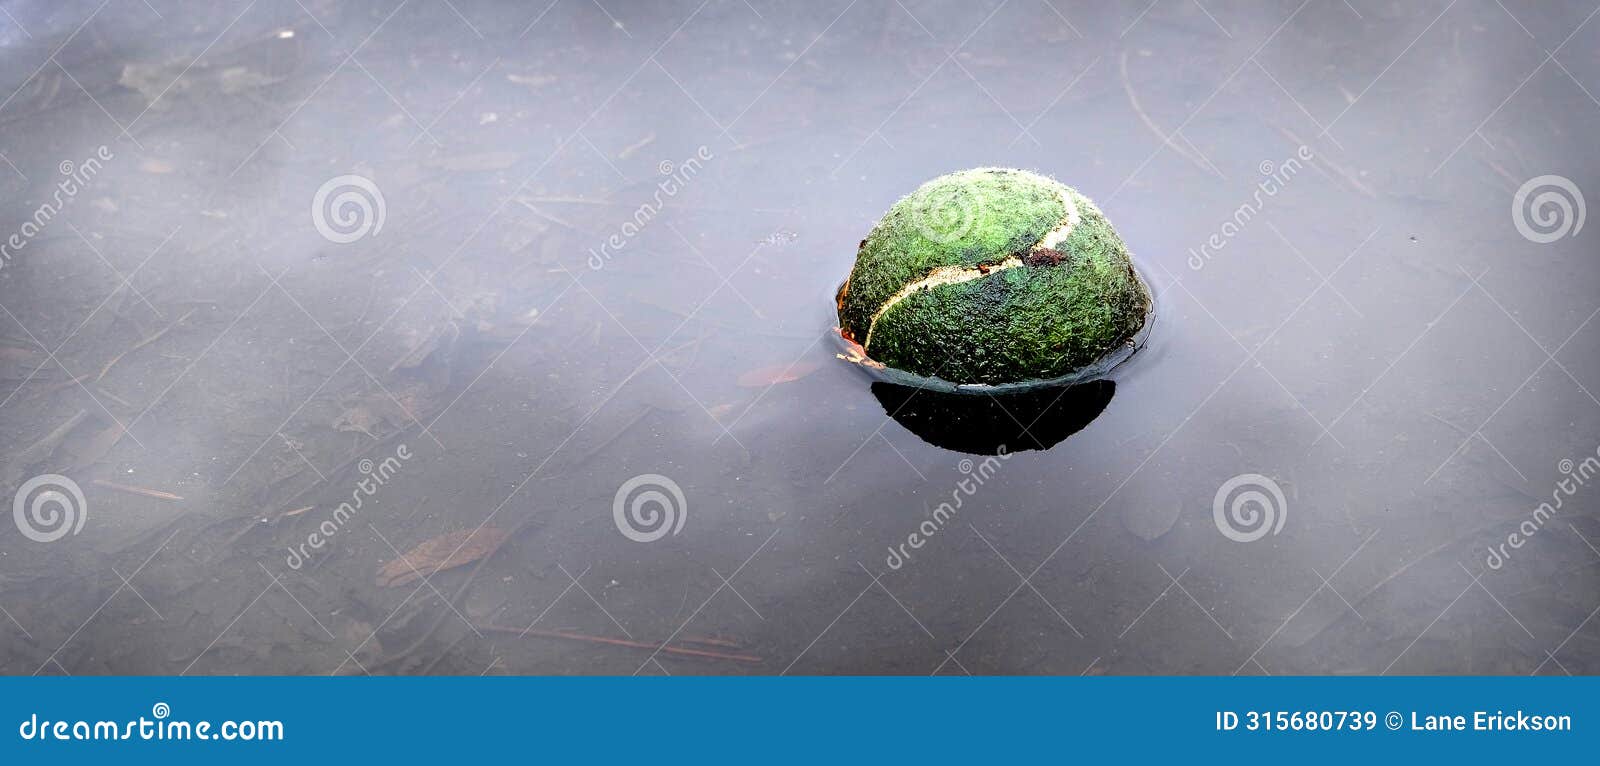 tennis ball floating in water sports forgotten abandoned